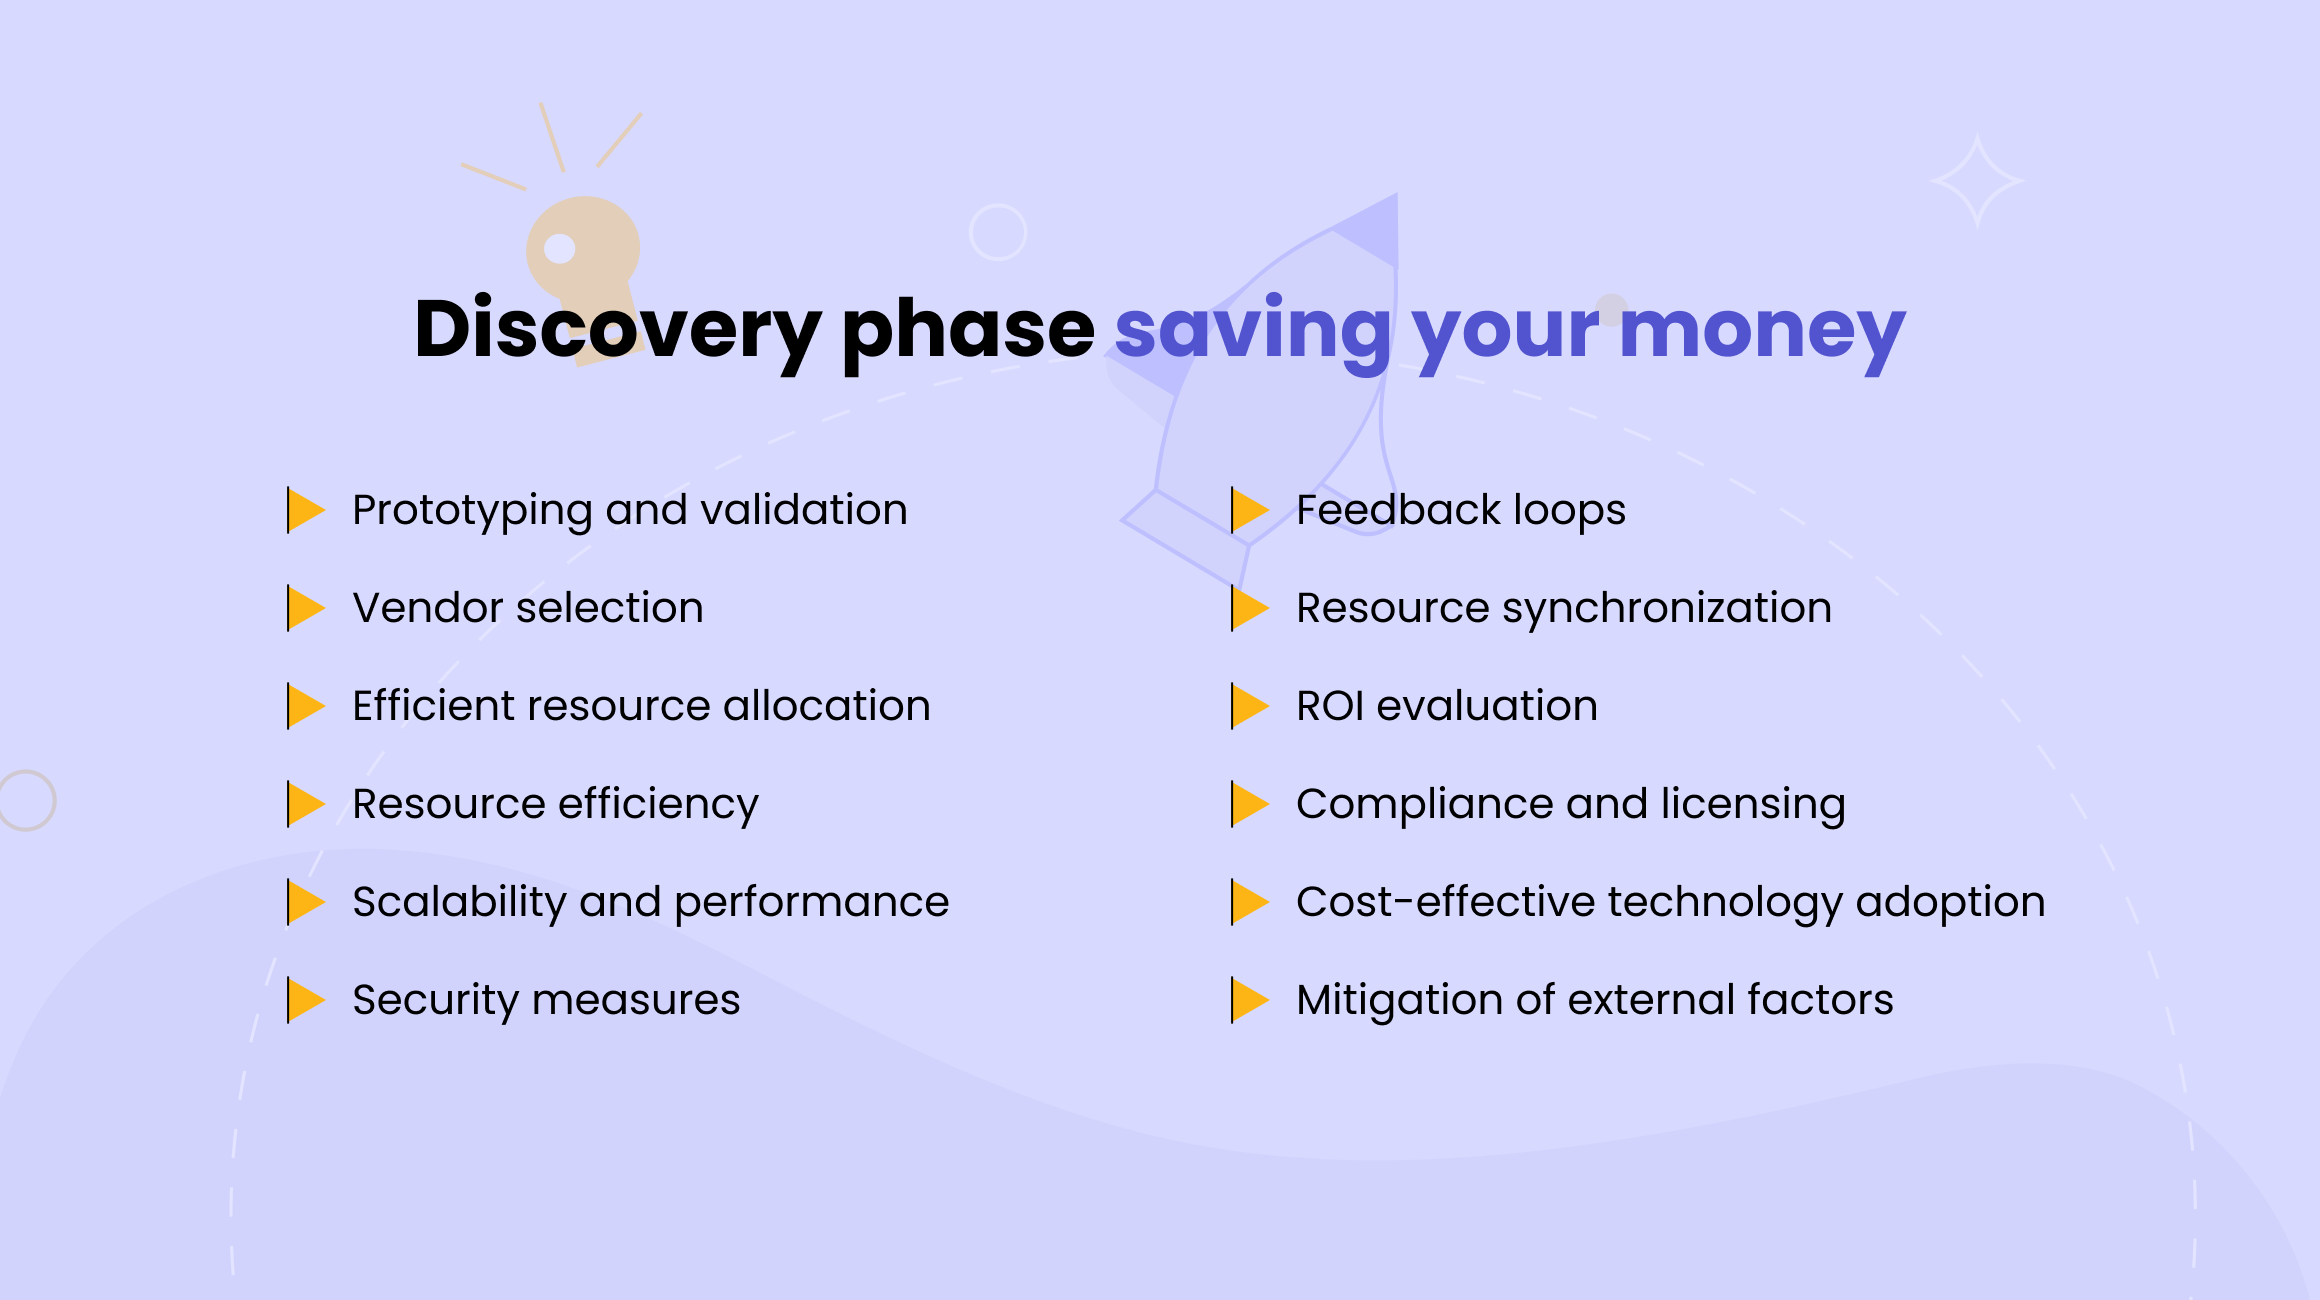 How does discovery phase help you save money?